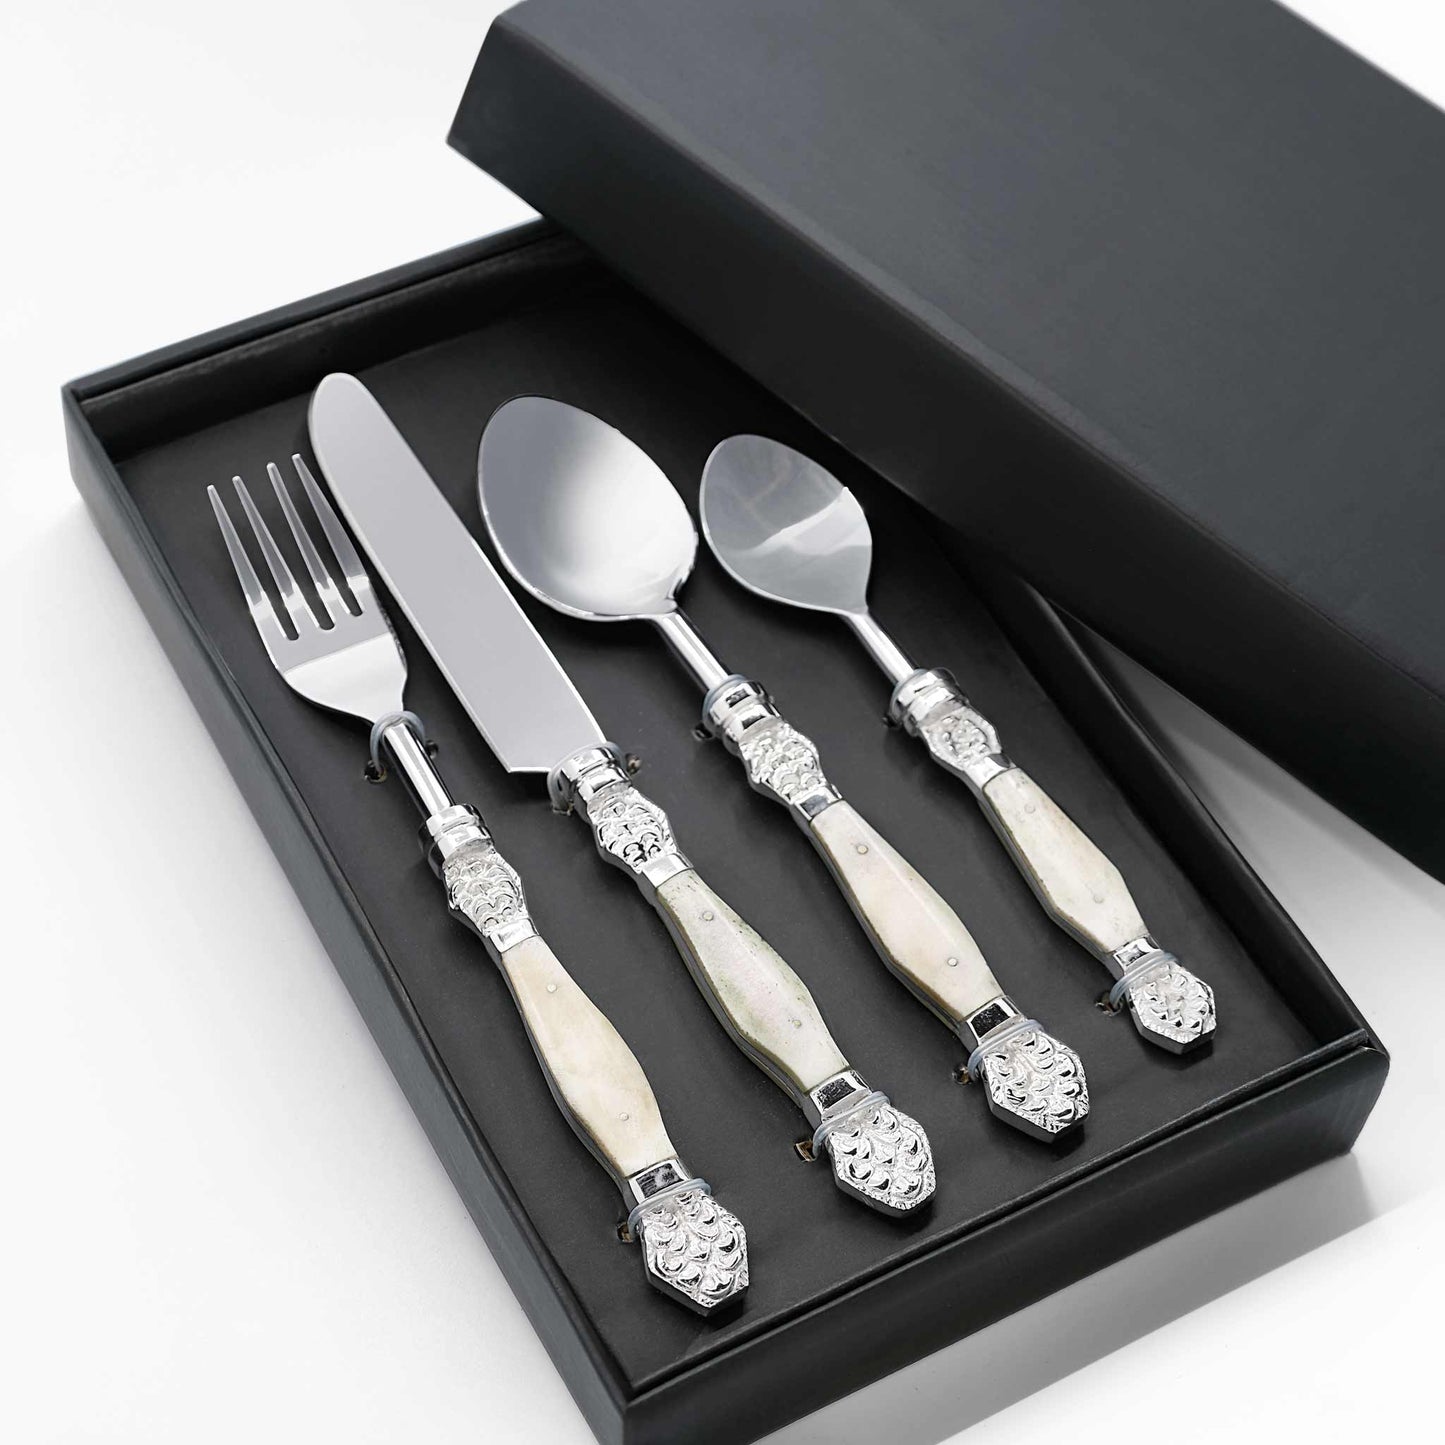 ZA Collective 4 Piece Ivory Cutlery Set